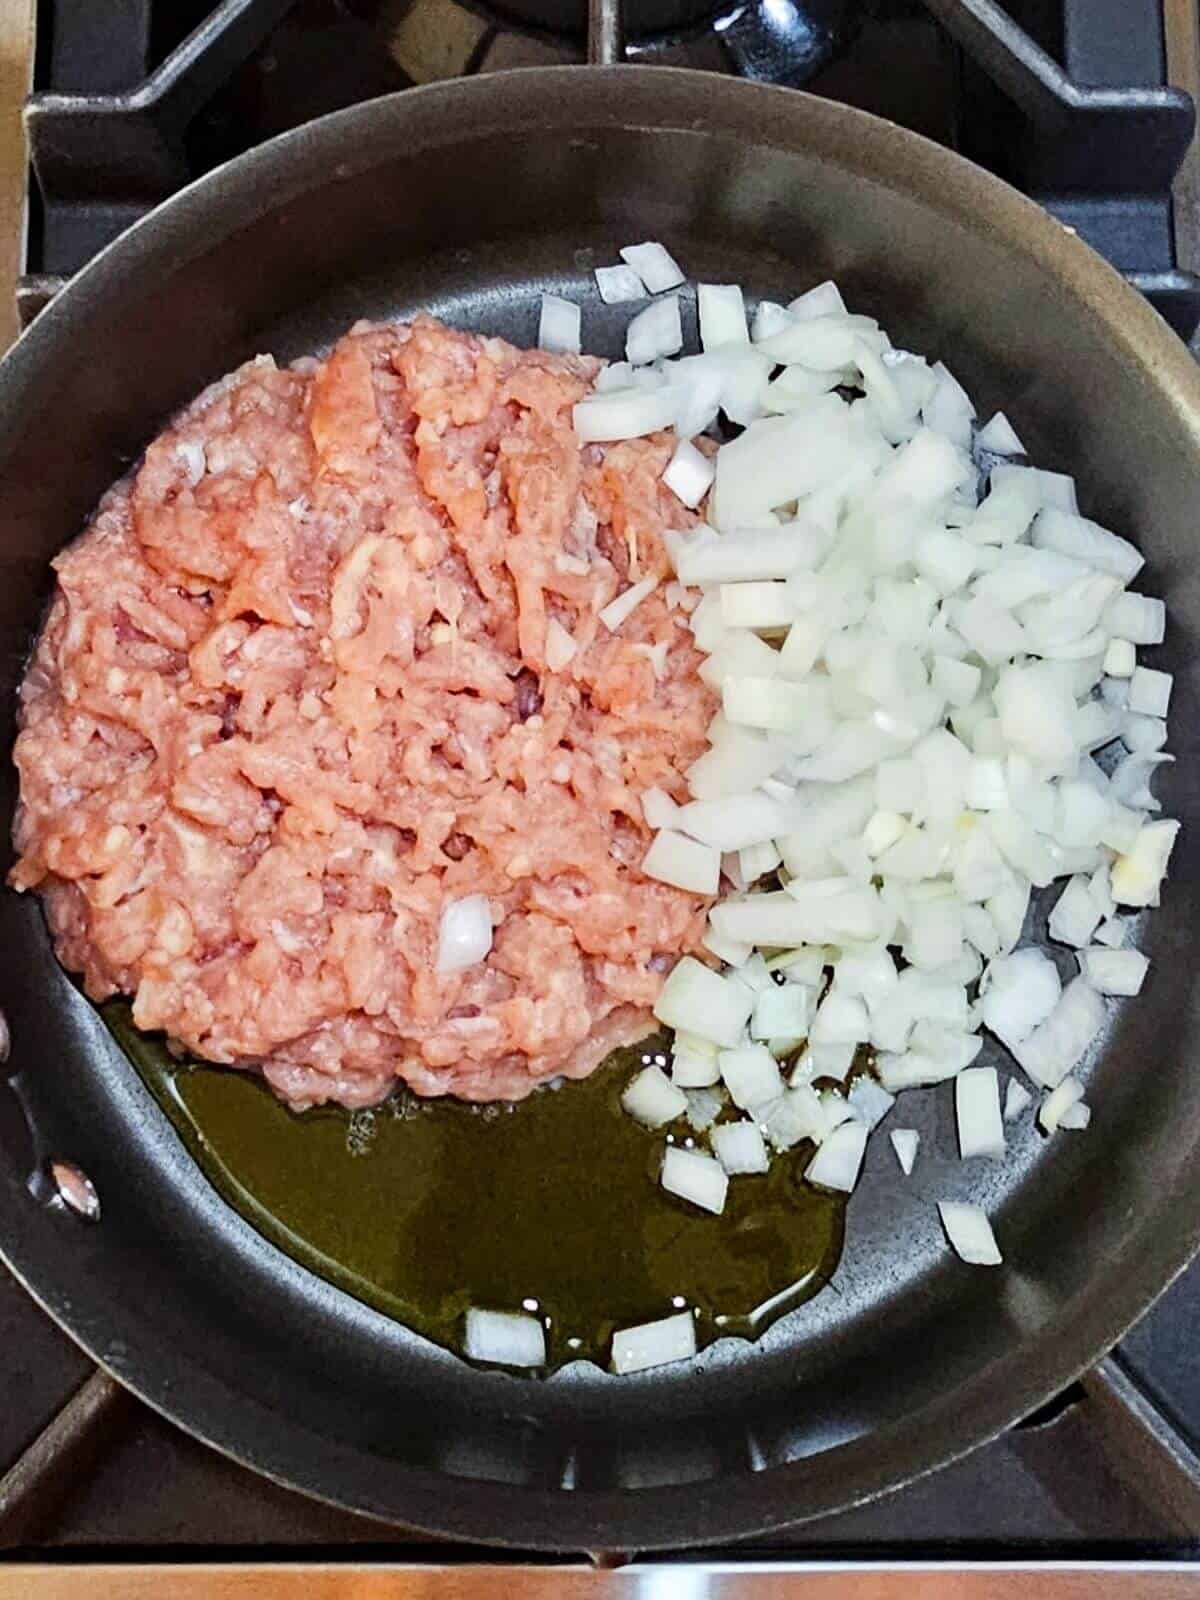 Raw ground chicken, olive oil and chopped onions in a skillet.